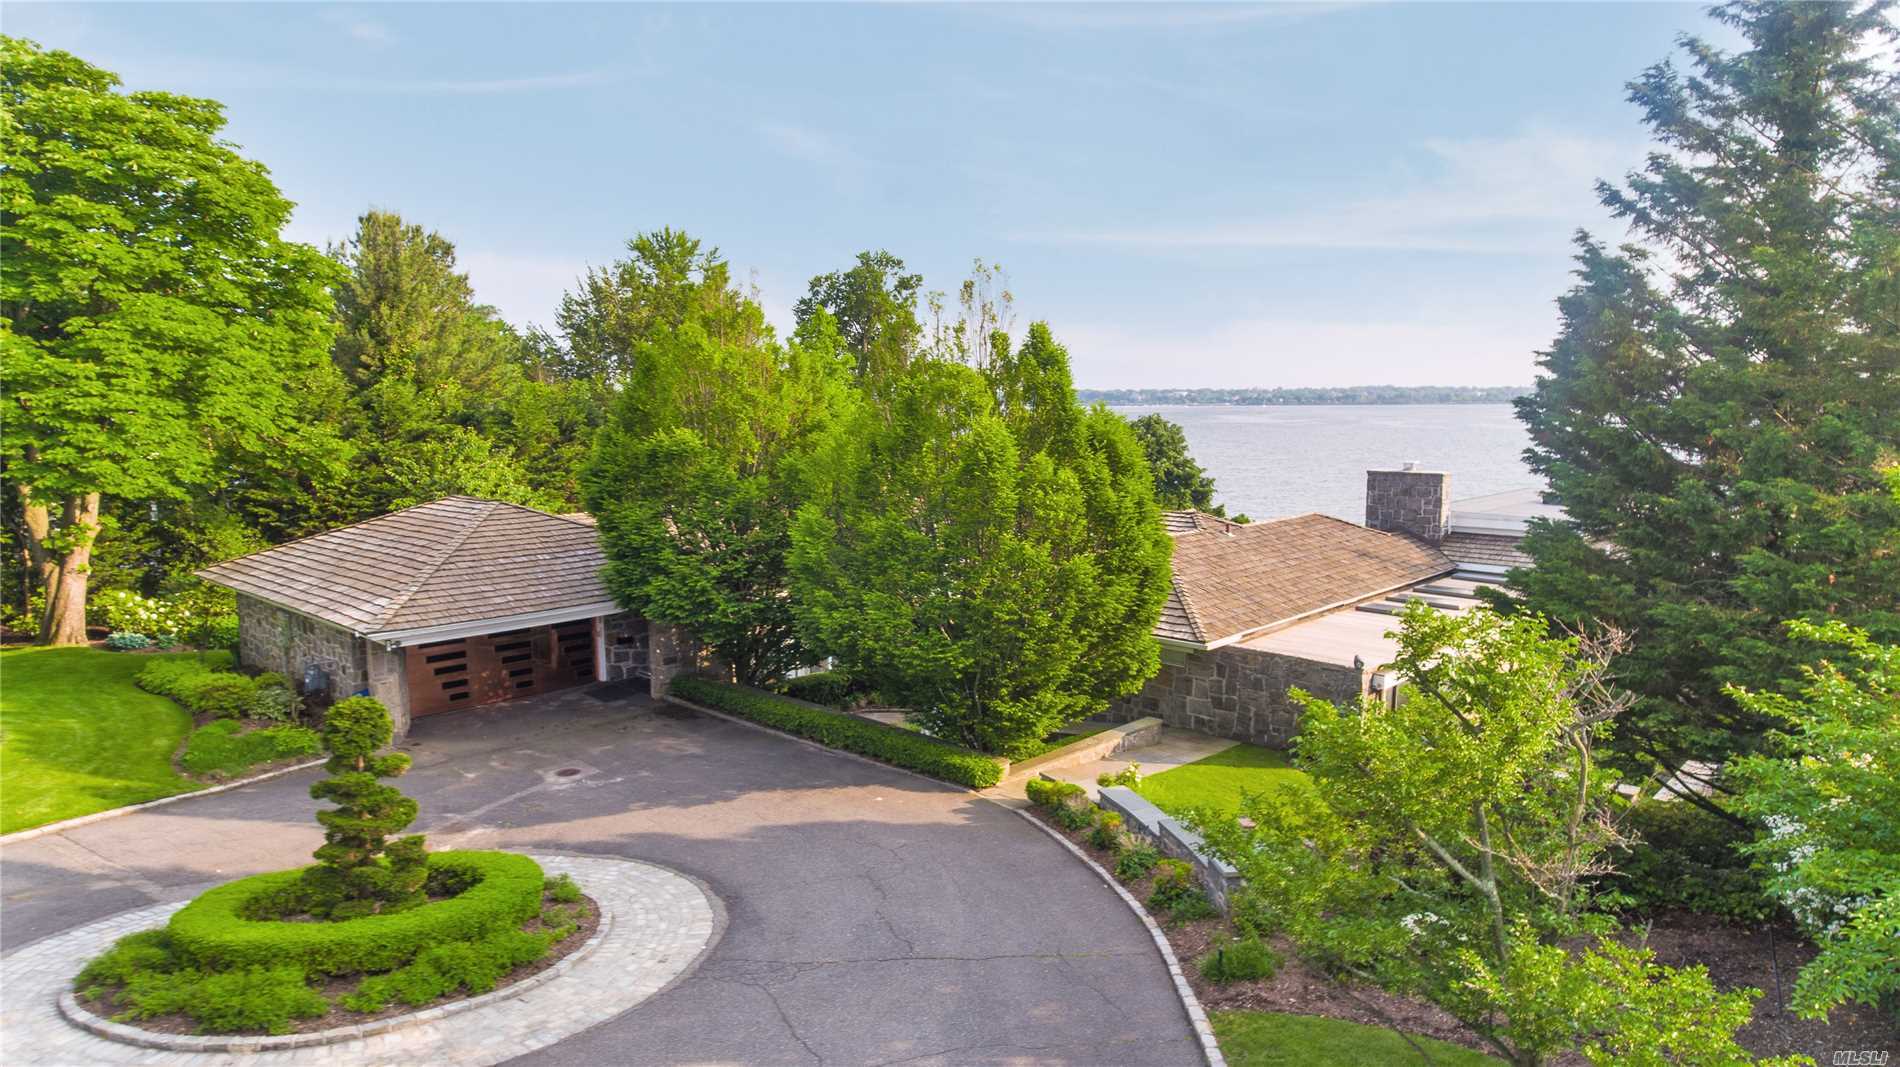 1.25 Waterfront Acre Retreat! This Gorgeous Modern Ranch is located in prestigious Village of Kings Point. An entertainer&rsquo;s Dream with Panoramic West Side water views of the Manhattan Skyline & City Bridges. An Oasis built by renowned architect. Spectacular sunsets, luscious green lawns and specimen plantings. This Gem features a Master Suite, 3 Additional Bedrooms, 4 Full Baths and 2 Half Baths, Lovely Eat-in-Kitchen, Spacious Living room with fireplace, Full Generator, Pool & so much more